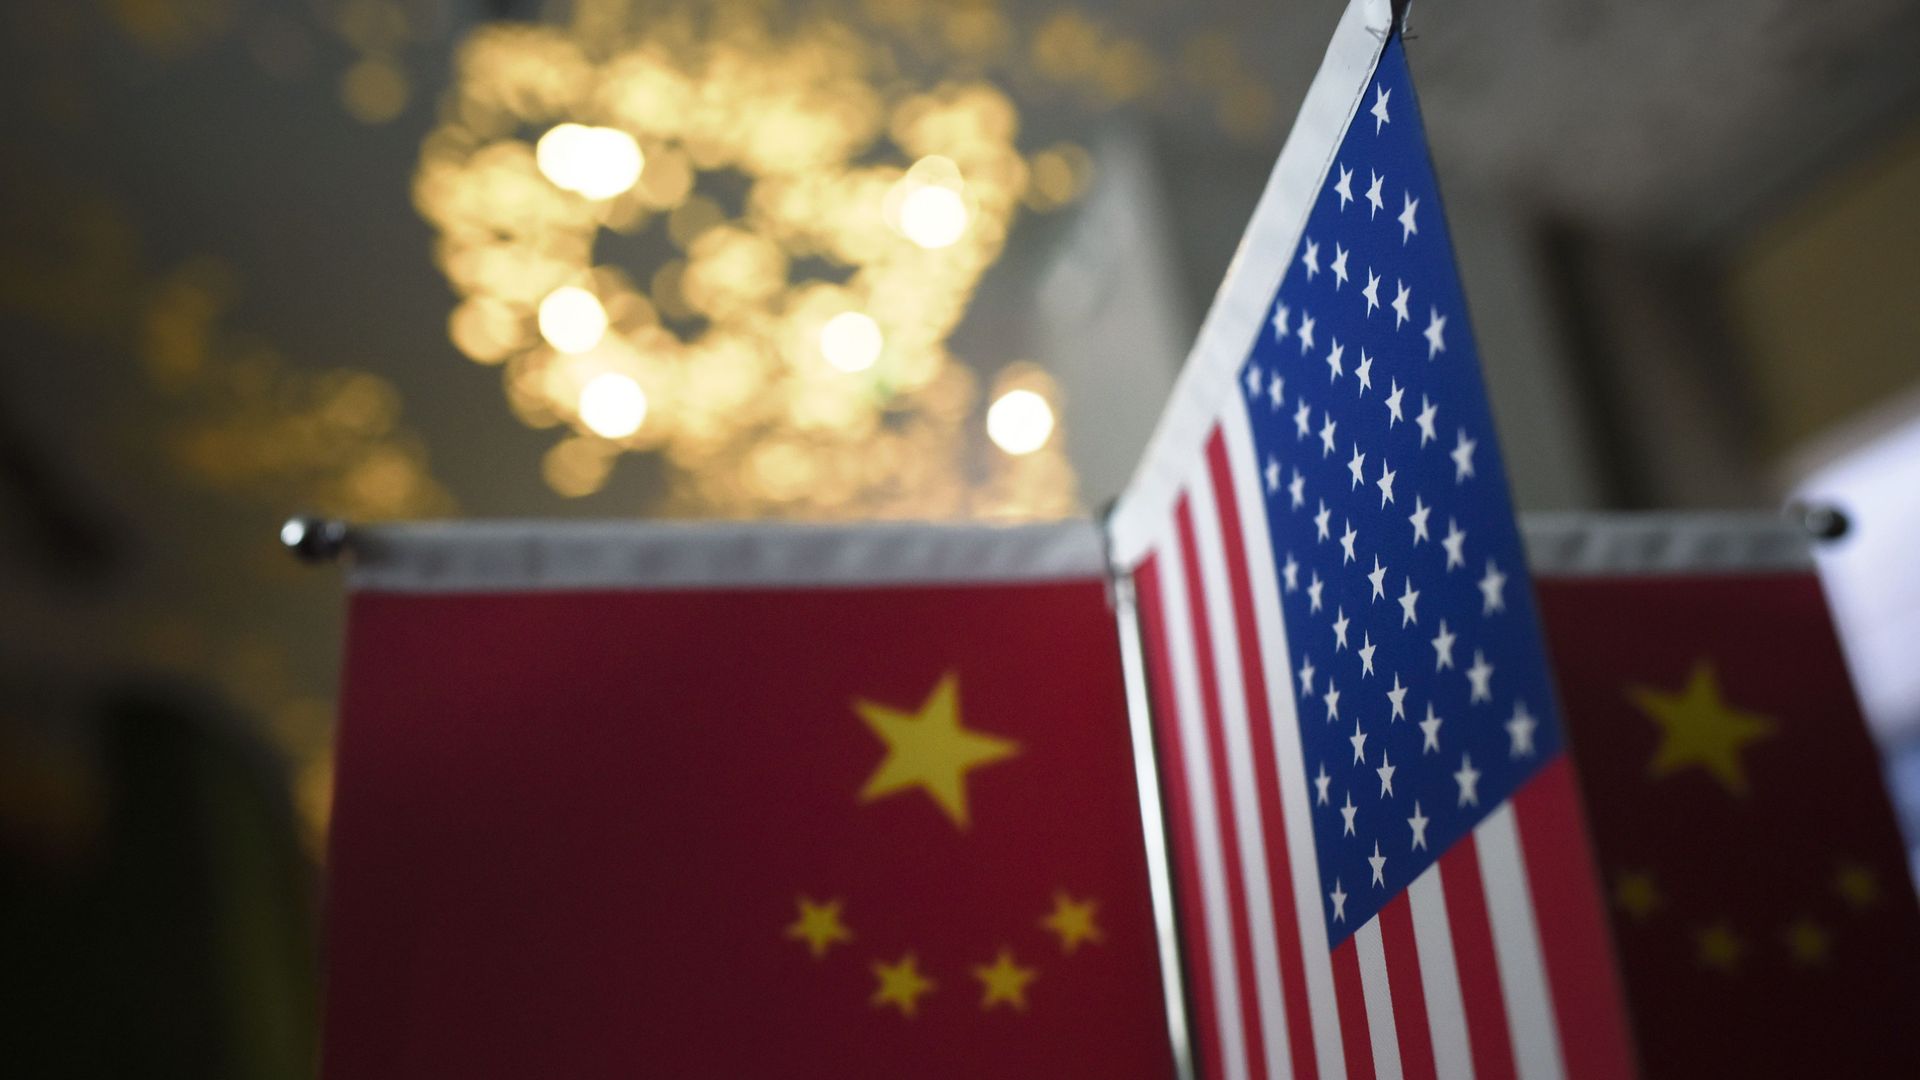 Chinese flags and American flags are displayed in a company in Beijing on August 16, 2017